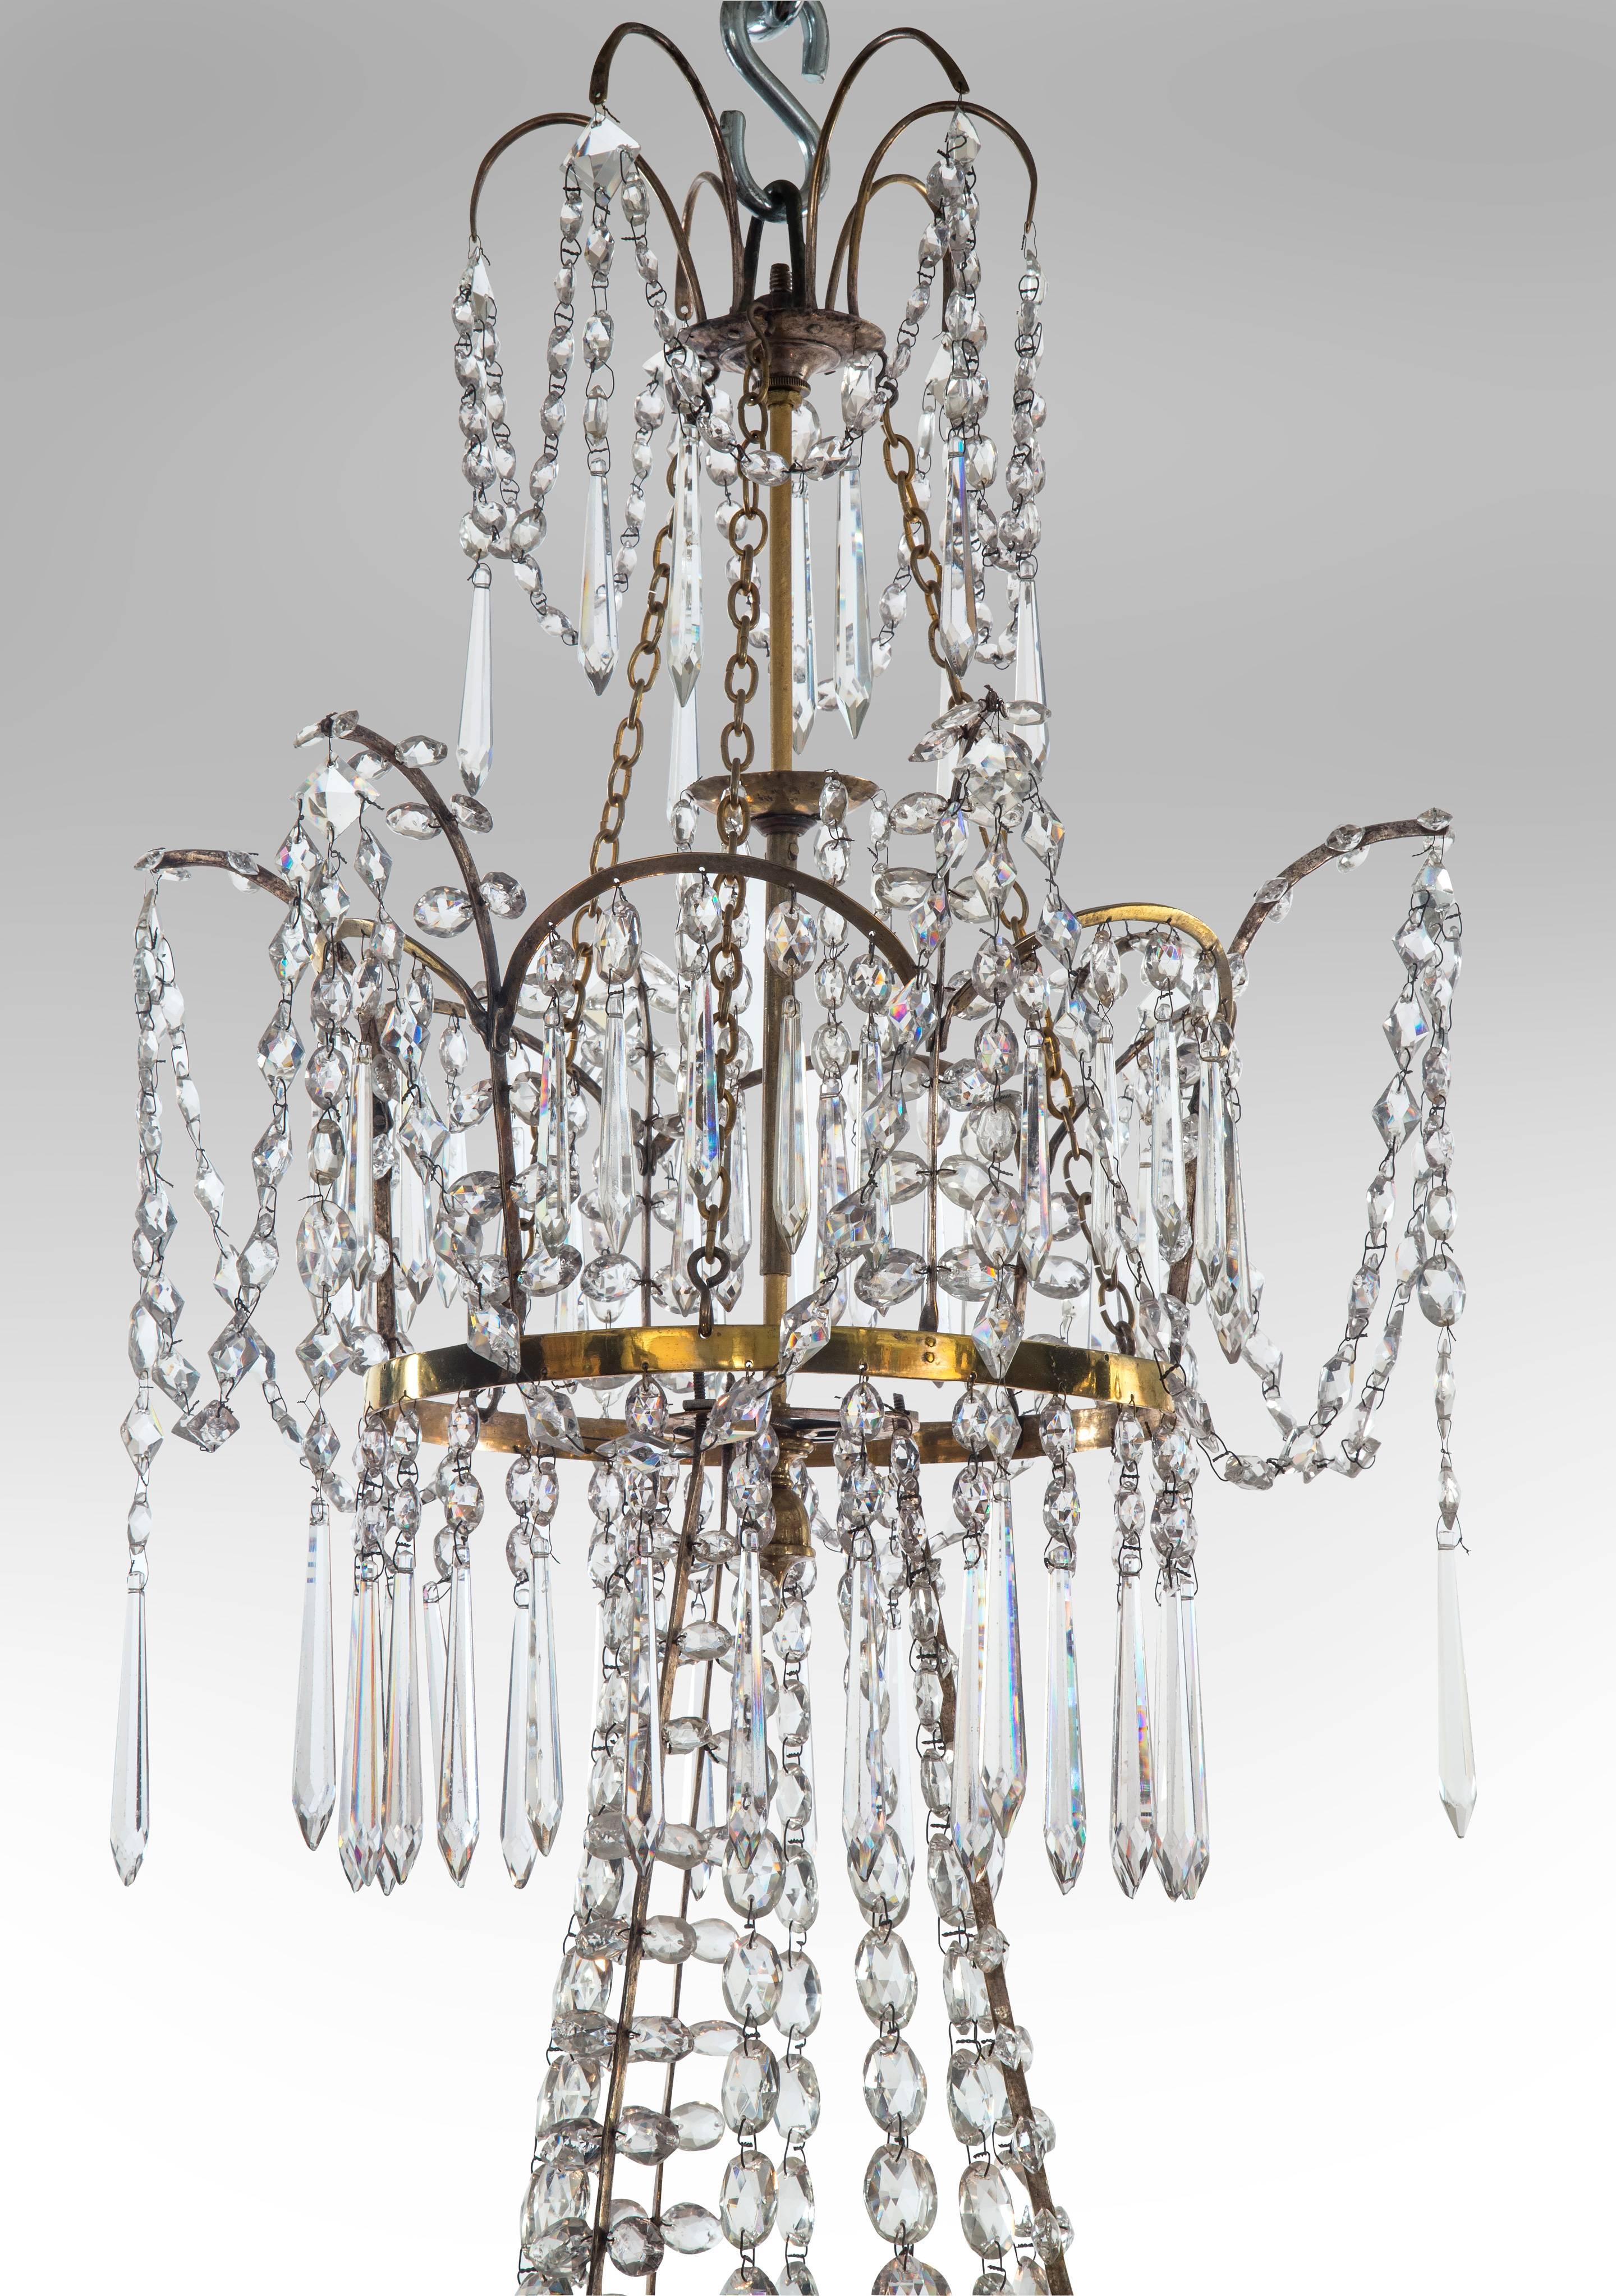 An exceptional chandelier of elegant proportions. The two tiered corona fitted with arches hung with swags and faceted drops, the central cascade of graduated strands and feather sprays, the principal tier fitted with six S-shape arms supporting urn